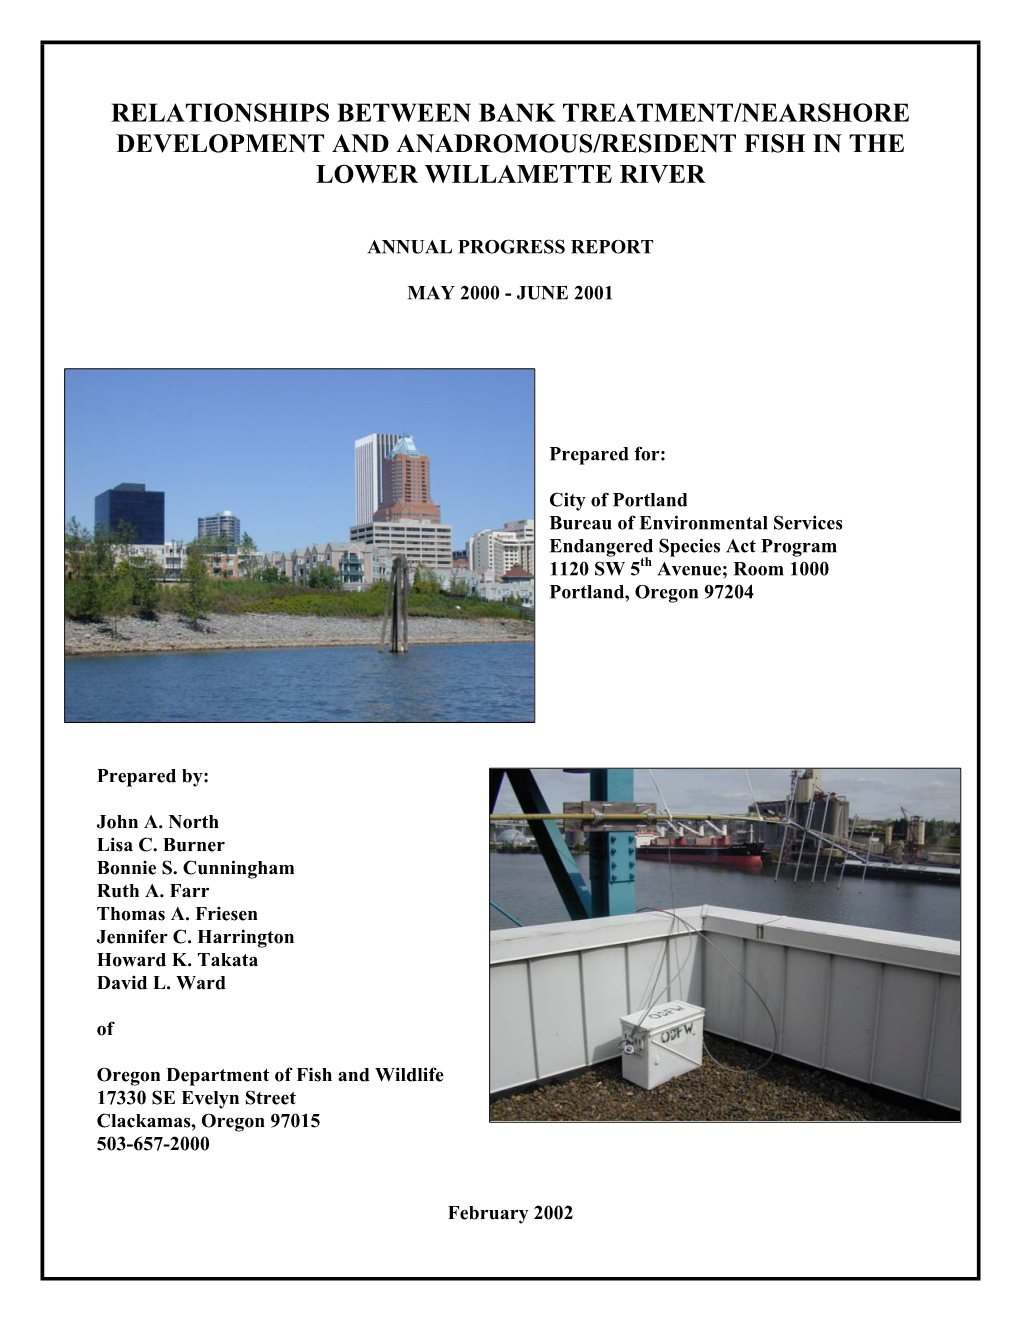 Relationships Between Bank Treatment/Nearshore Development and Anadromous/Resident Fish in the Lower Willamette River